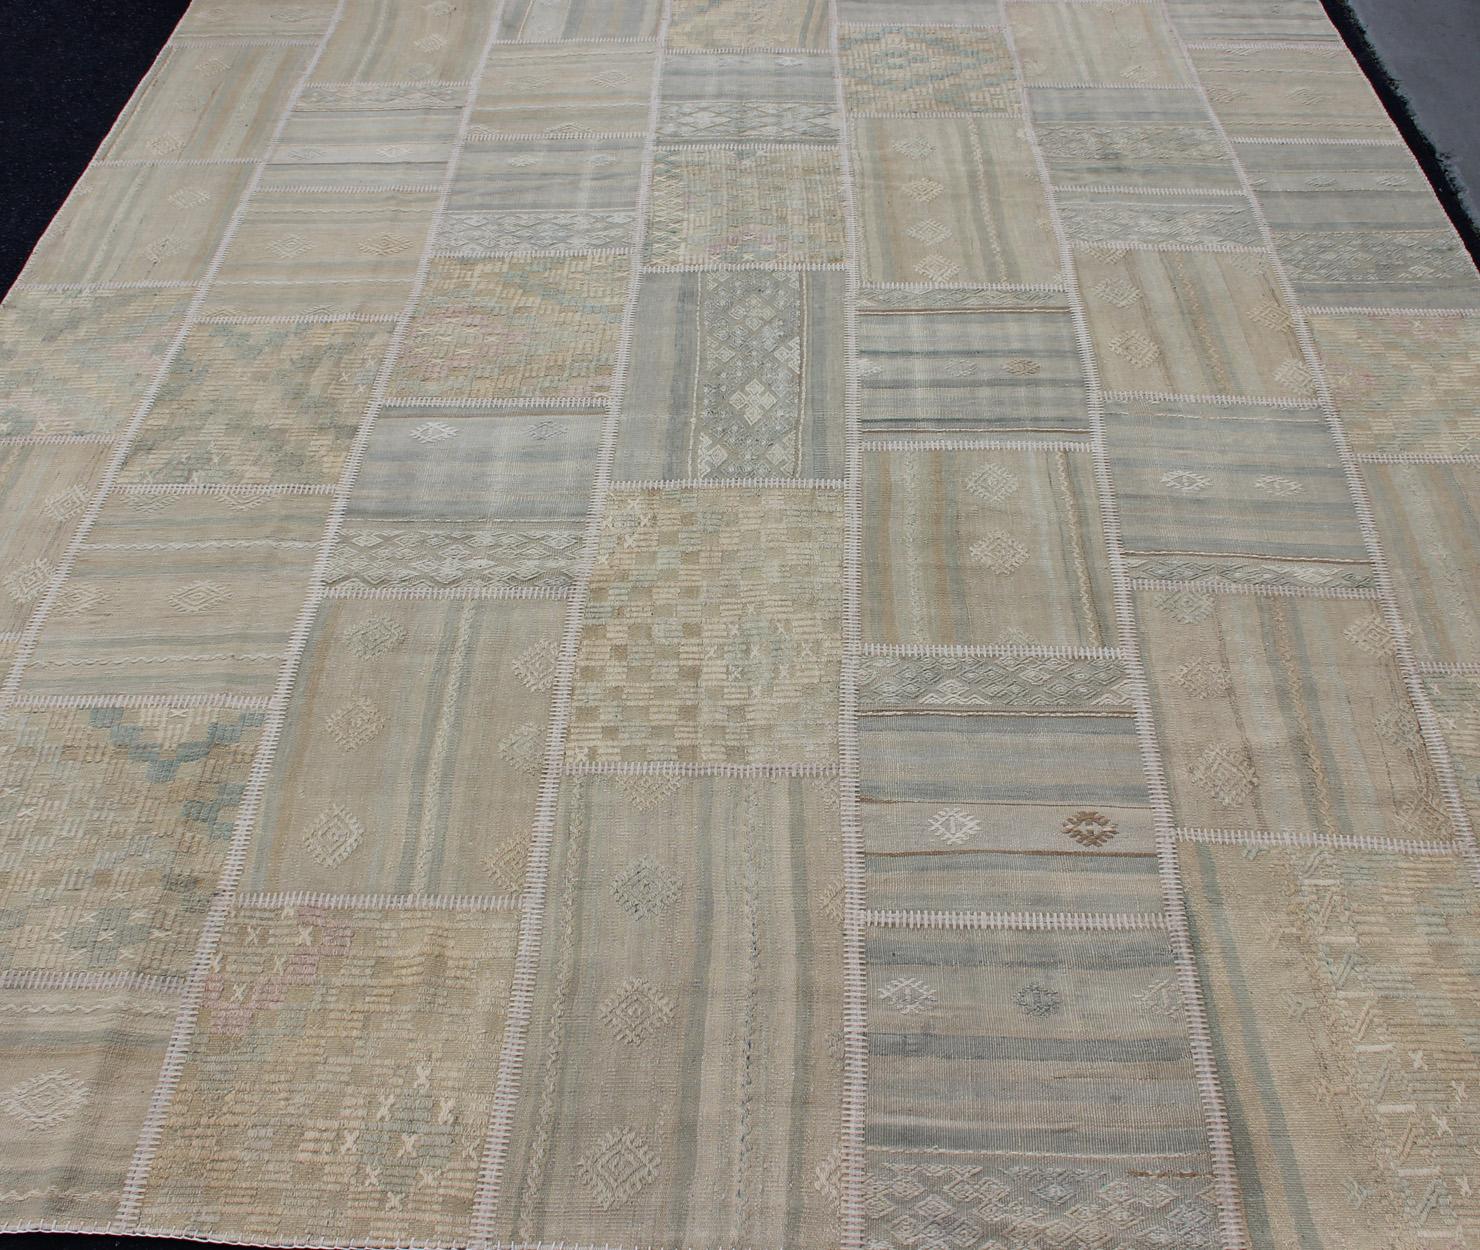 Large Turkish kilim from vintage pieces skillfully put together. This fine patchwork rug has light green, tan, taupe, blue, cream, brown and neutral tones, rug/EN-179675, country of origin / type: Turkey / Patchwork, circa 1930.

This vintage